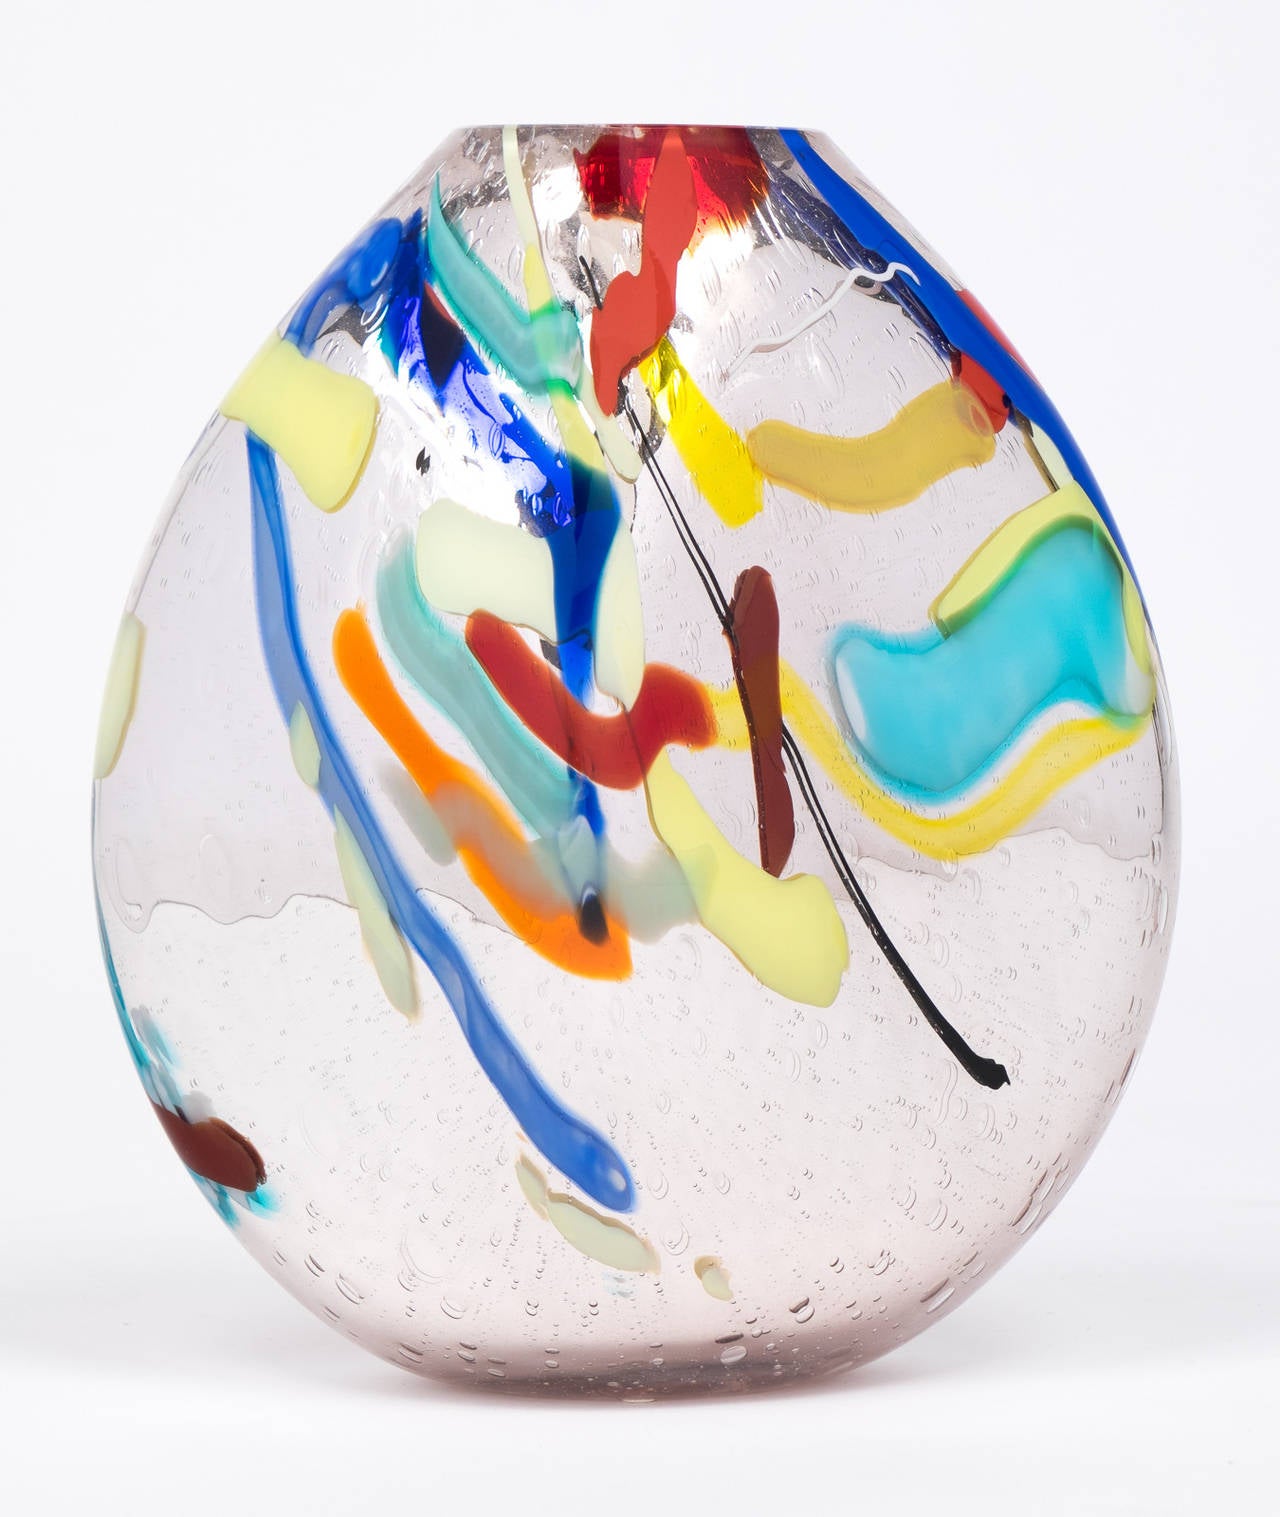 Superb glass work by D. Dona, polychrome abstract decor on mercury glass.